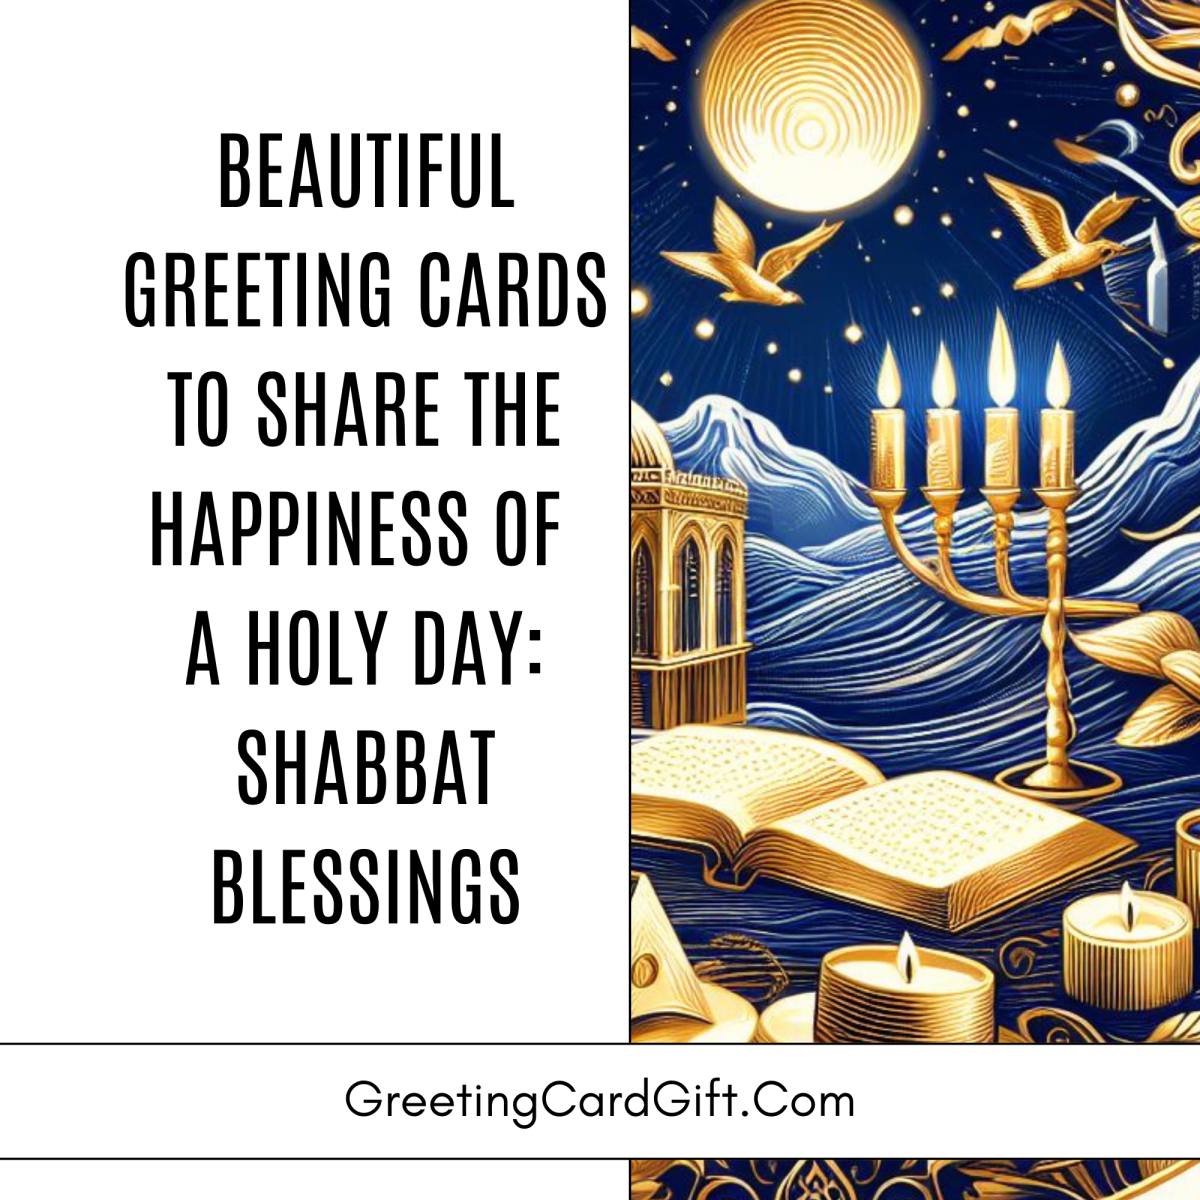 Beautiful Greeting Cards To Share The Happiness Of A Holy Day: Shabbat Blessings